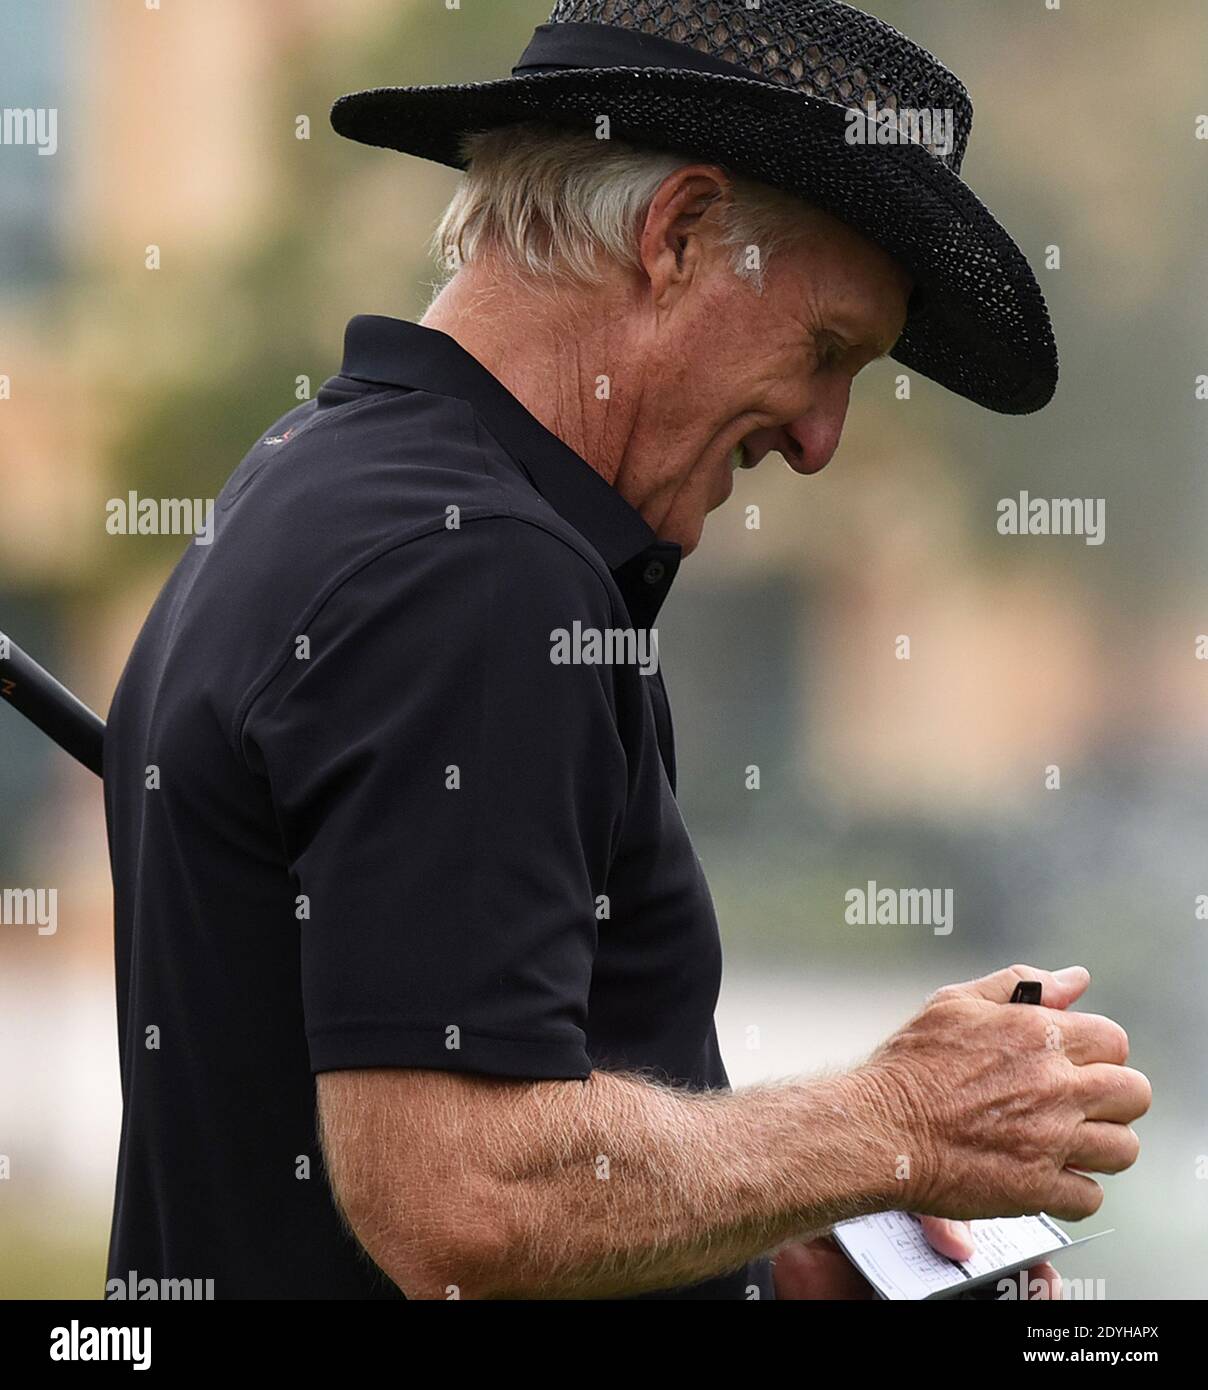 December 20, 2020 - Orlando, Florida, United States - Australian Greg Norman fills out his scorecard  after finishing the final round at the PNC Championship golf tournament at the Ritz-Carlton Golf Club on December 20, 2020 in Orlando, Florida. On Christmas Day, Norman posted a photo to Instagram from a hospital bed where he was being treated for COVID-19 symptoms. NormanÕs son, Greg Norman Jr., who played with his father at the tournament, also posted a photo to Instagram, stating that he and his fiancee have tested positive for the COVID-19 virus. (Paul Hennessy/Alamy) Stock Photo